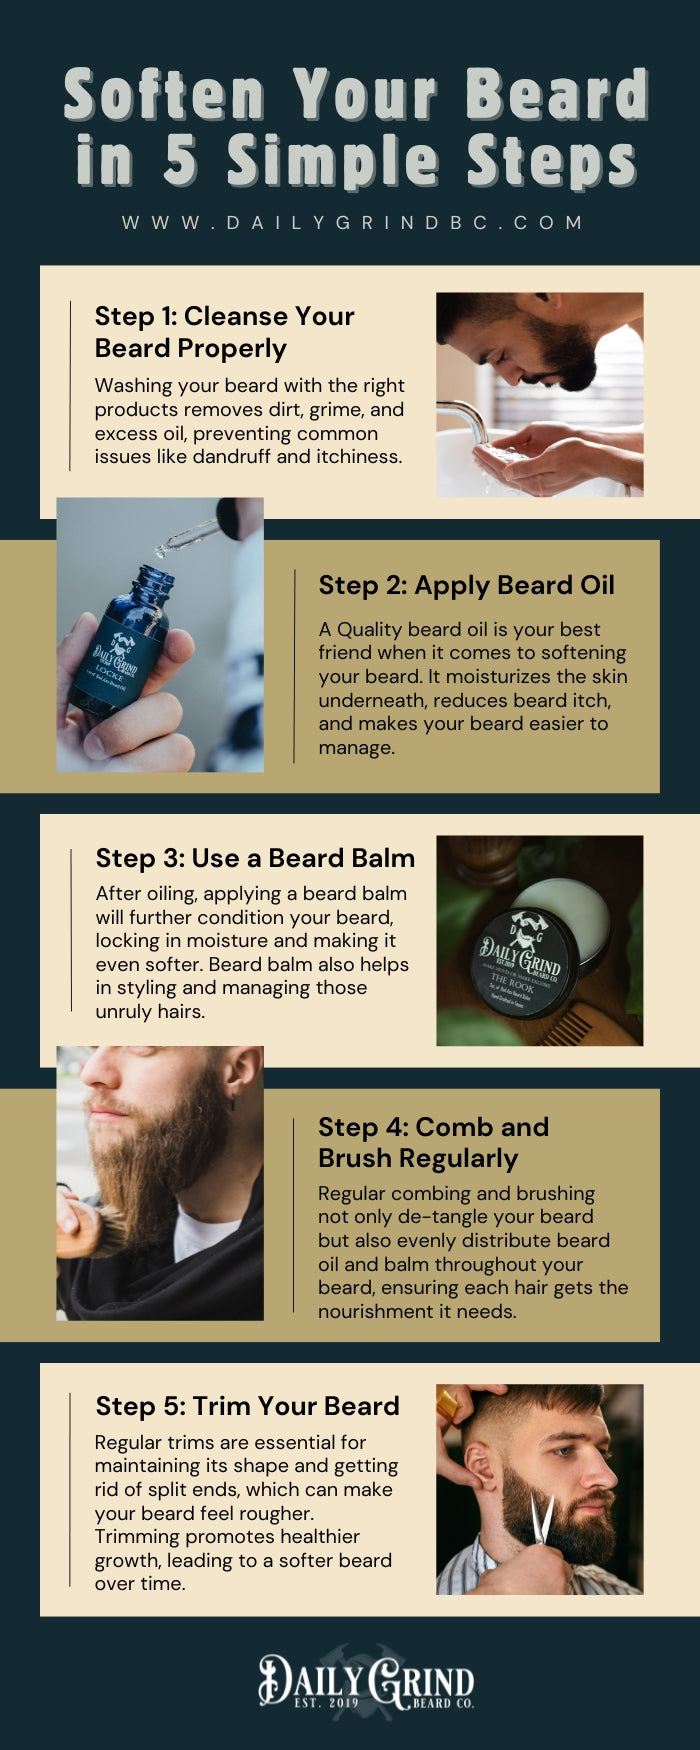 Soften Your Beard in 5 Simple Steps infographic